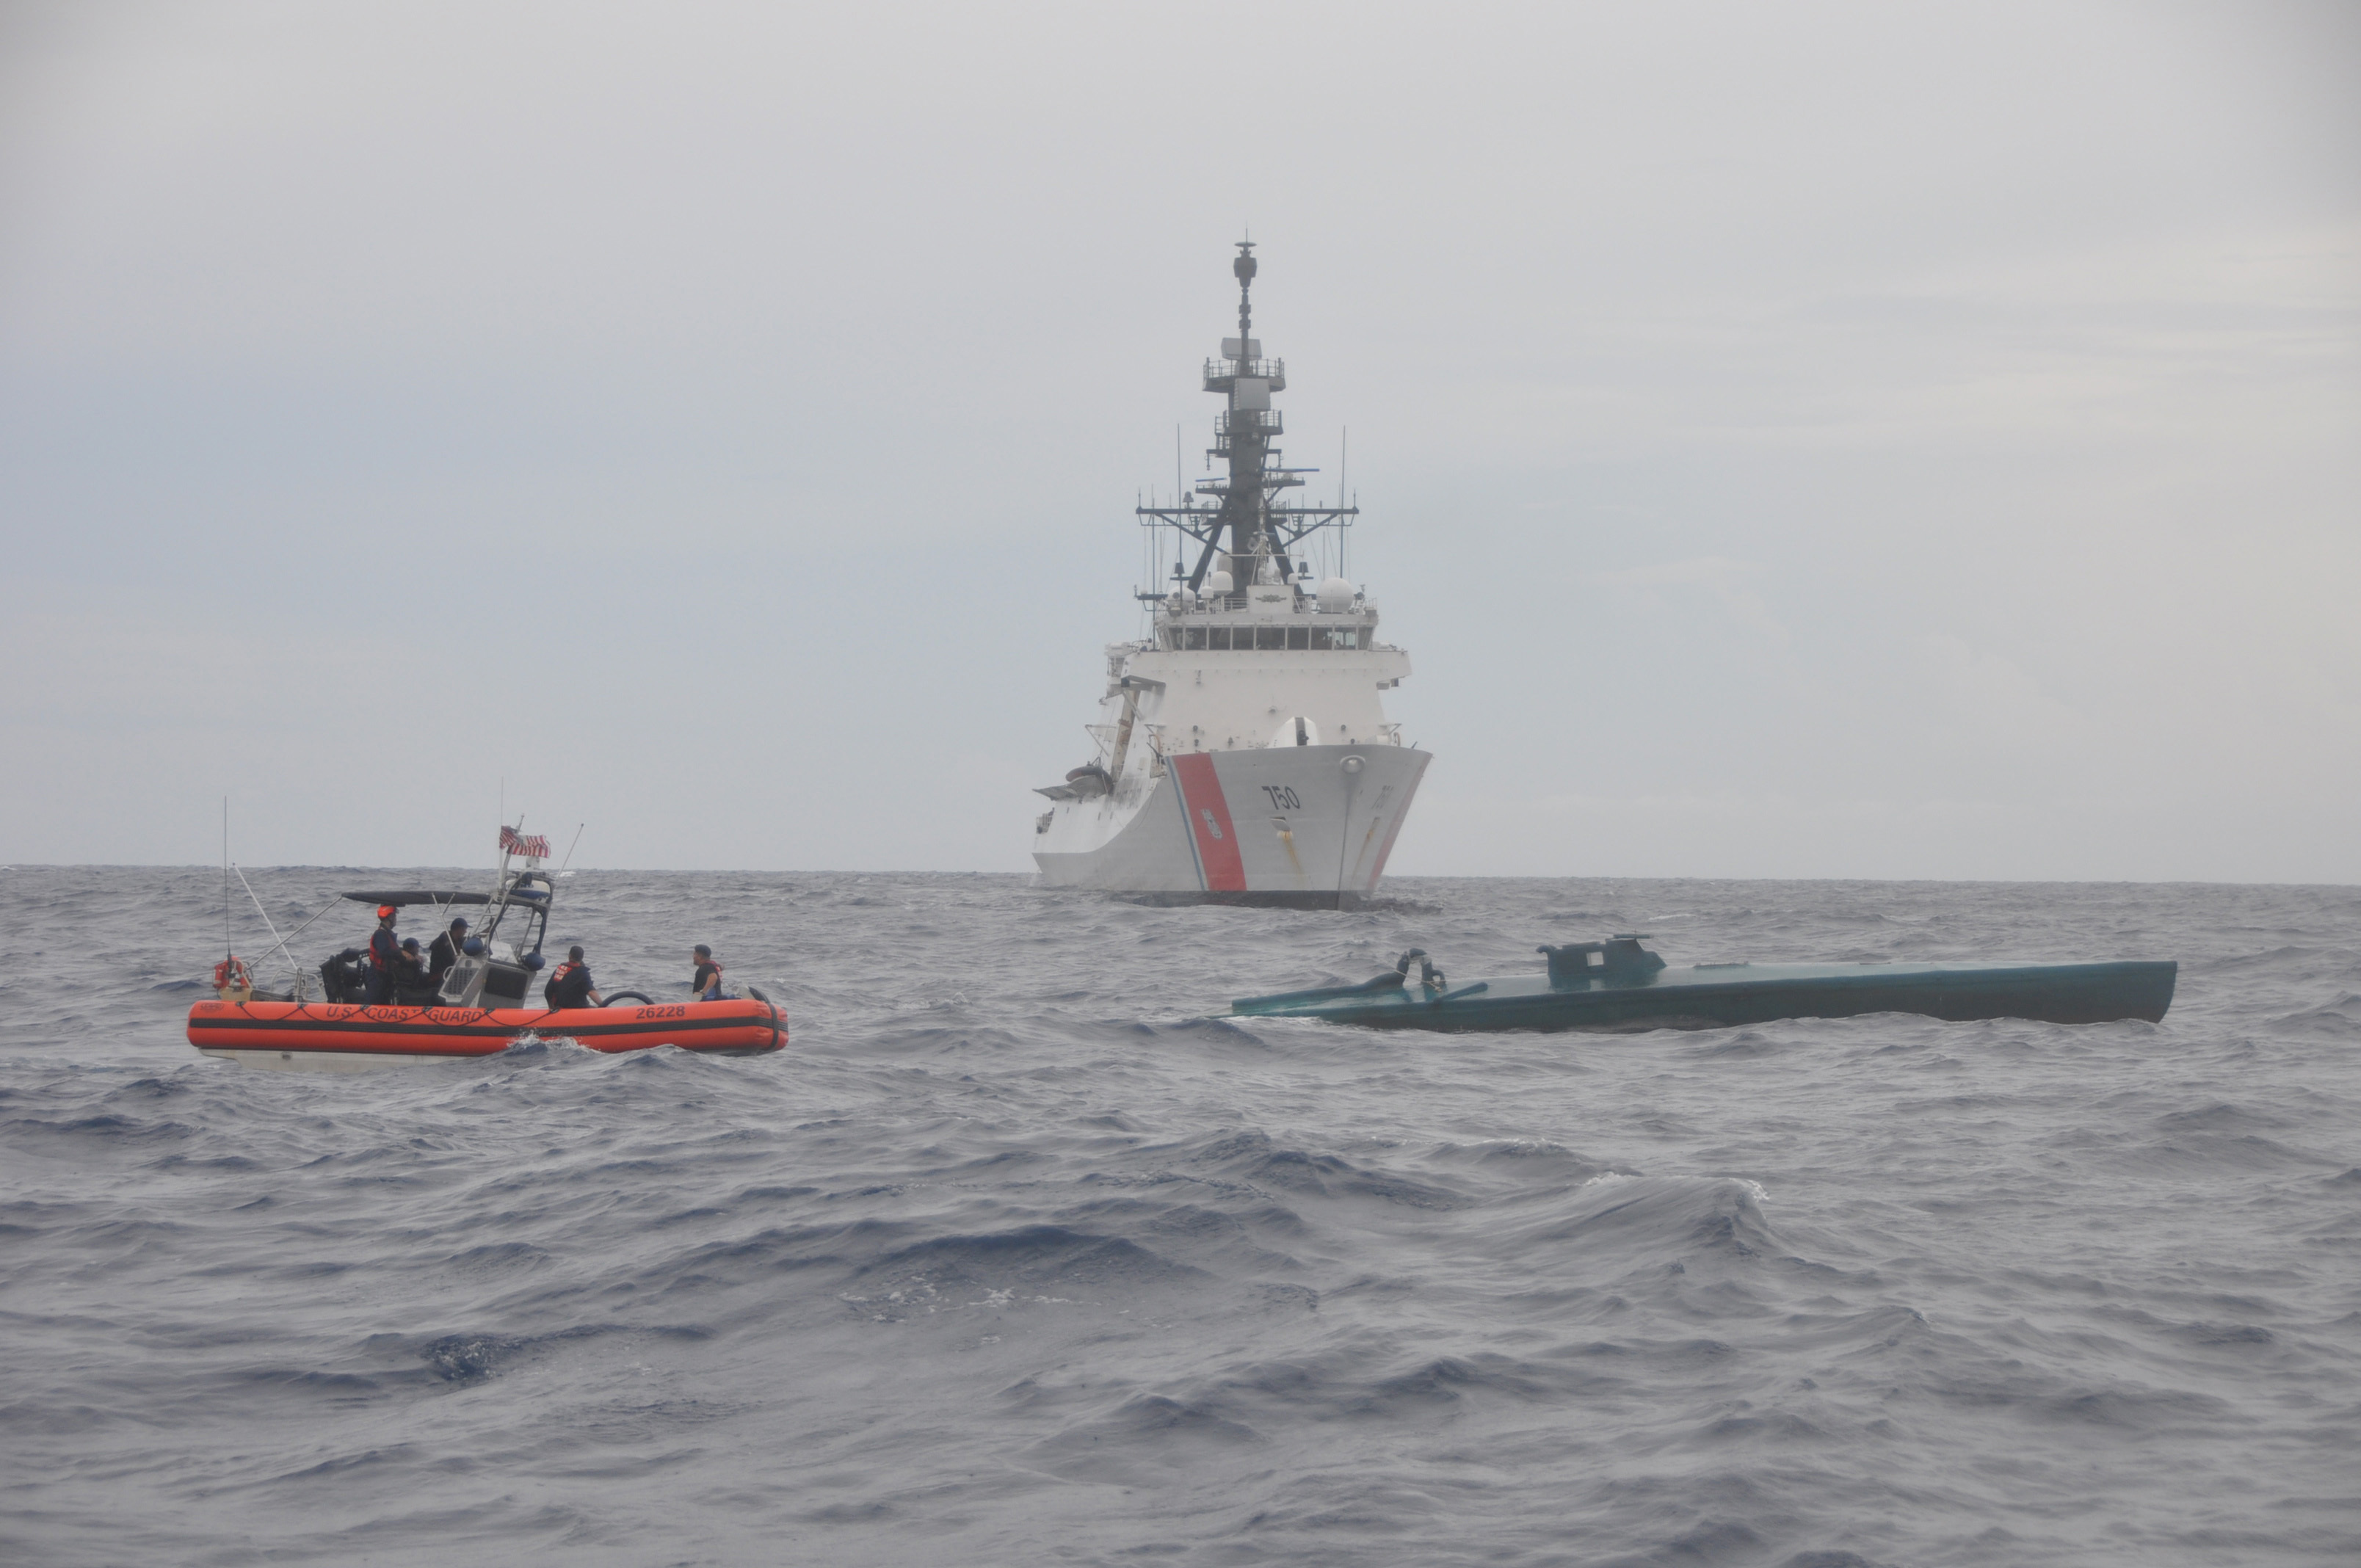 A Coast Guard Cutter Bertholf boarding team aboard an Over the Horizon Long-Range Interceptor boat conducts an interdiction of a self-propelled semi-submersible vessel suspected of smuggling 7.5 tons of cocaine in the Eastern Pacific Ocean, Aug. 31, 2015. The seized contraband is worth an estimated $227 million. (U.S. Coast Guard photo) 